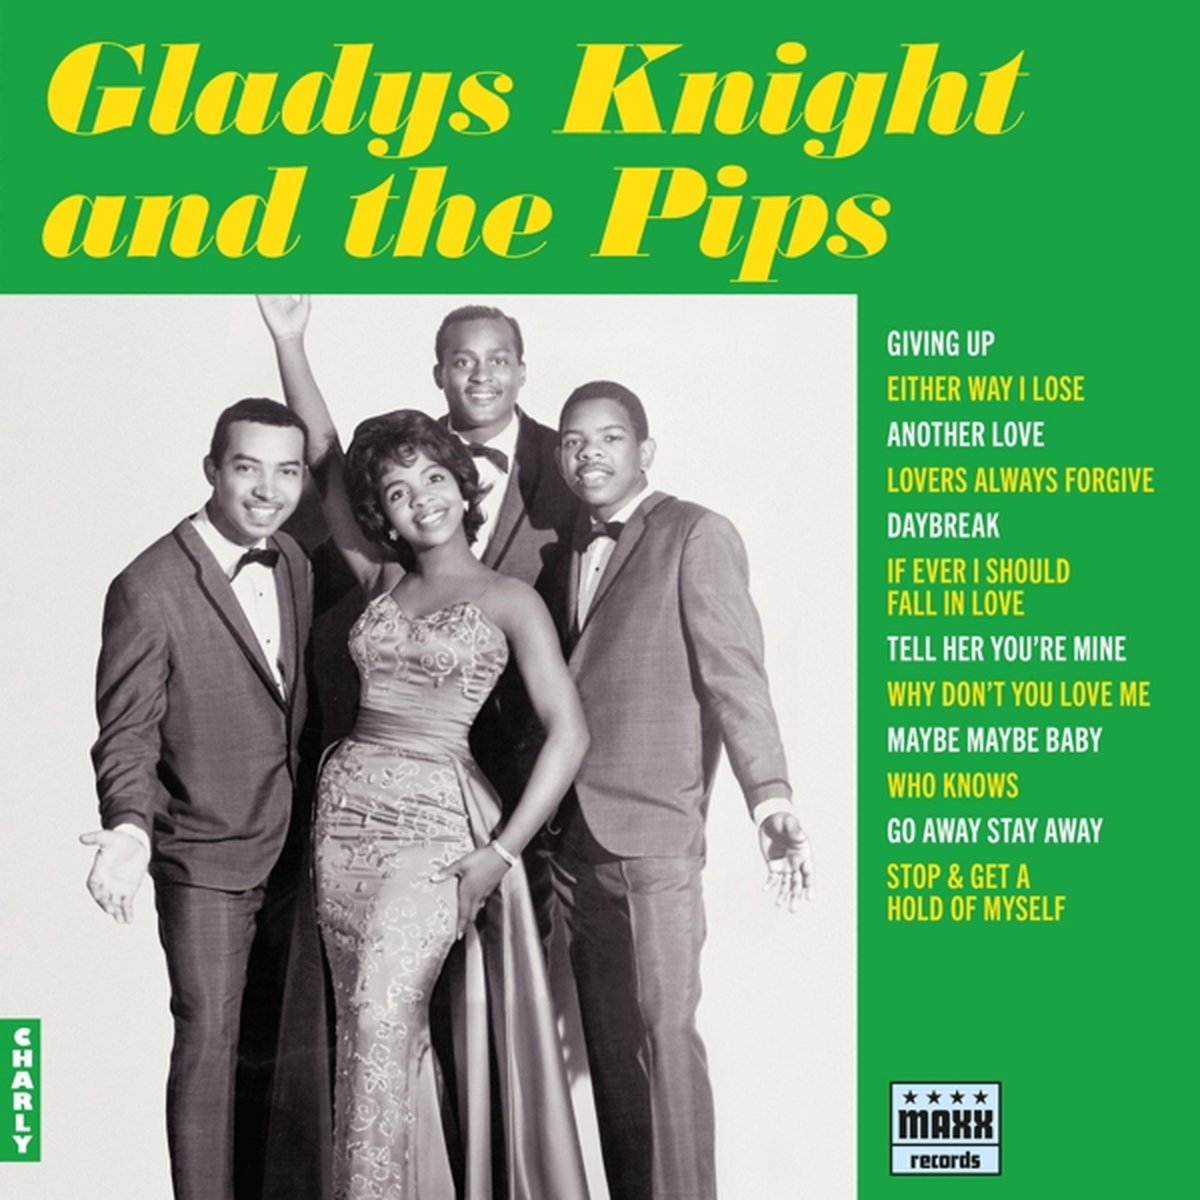 Gladys Knight and the Pips - Gladys Knight & the Pips